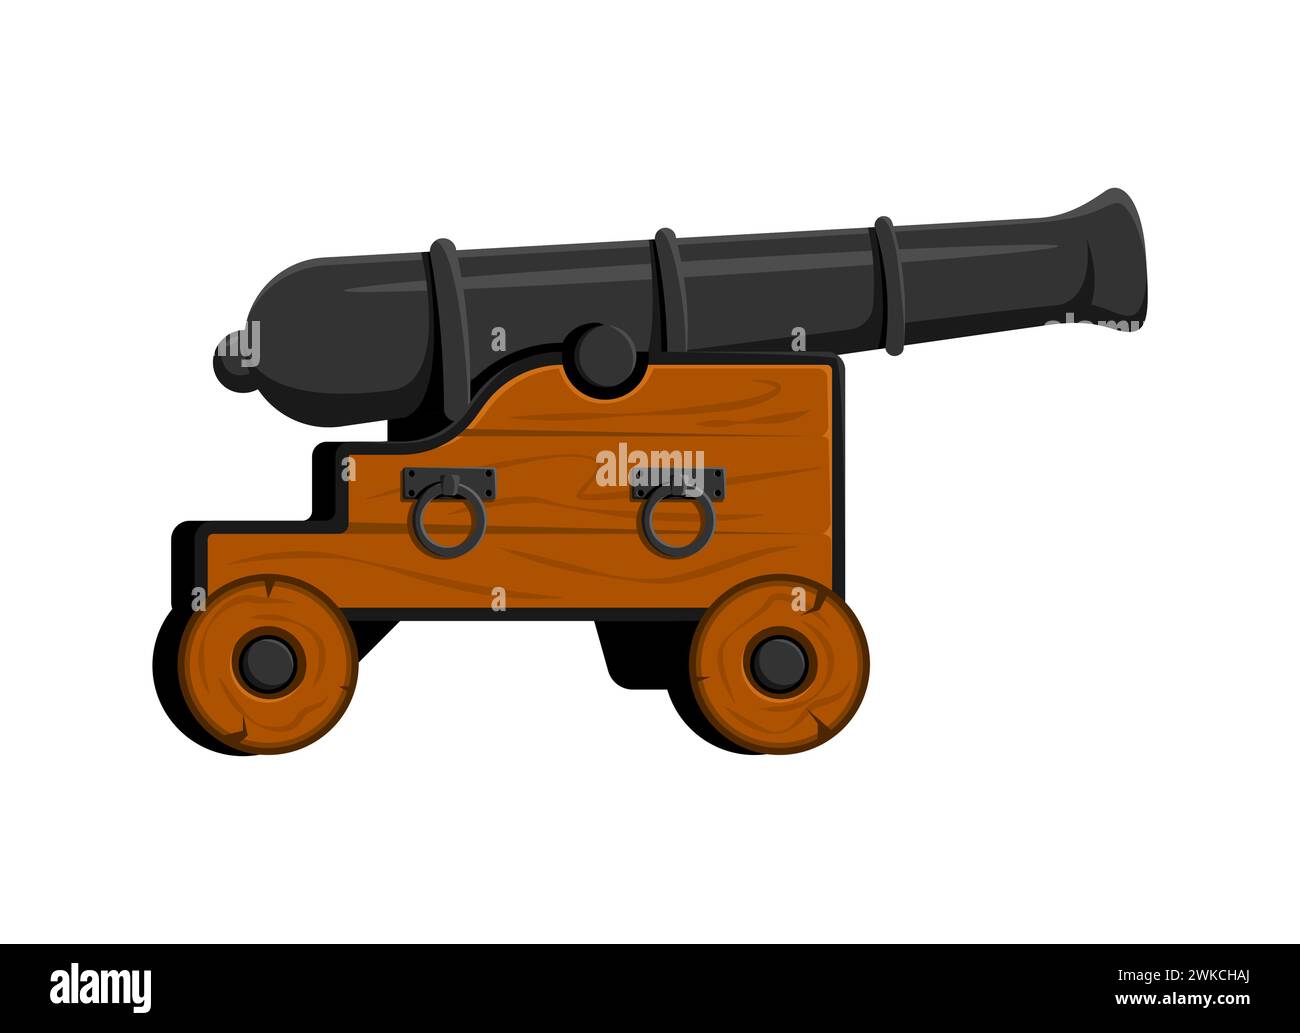 Cartoon cannon, isolated vector vintage pirate weapon of war, poised for battle. Retro, antique military artillery piece, reminiscent of medieval and corsair warfare, ready to fire its iron cannonball Stock Vector